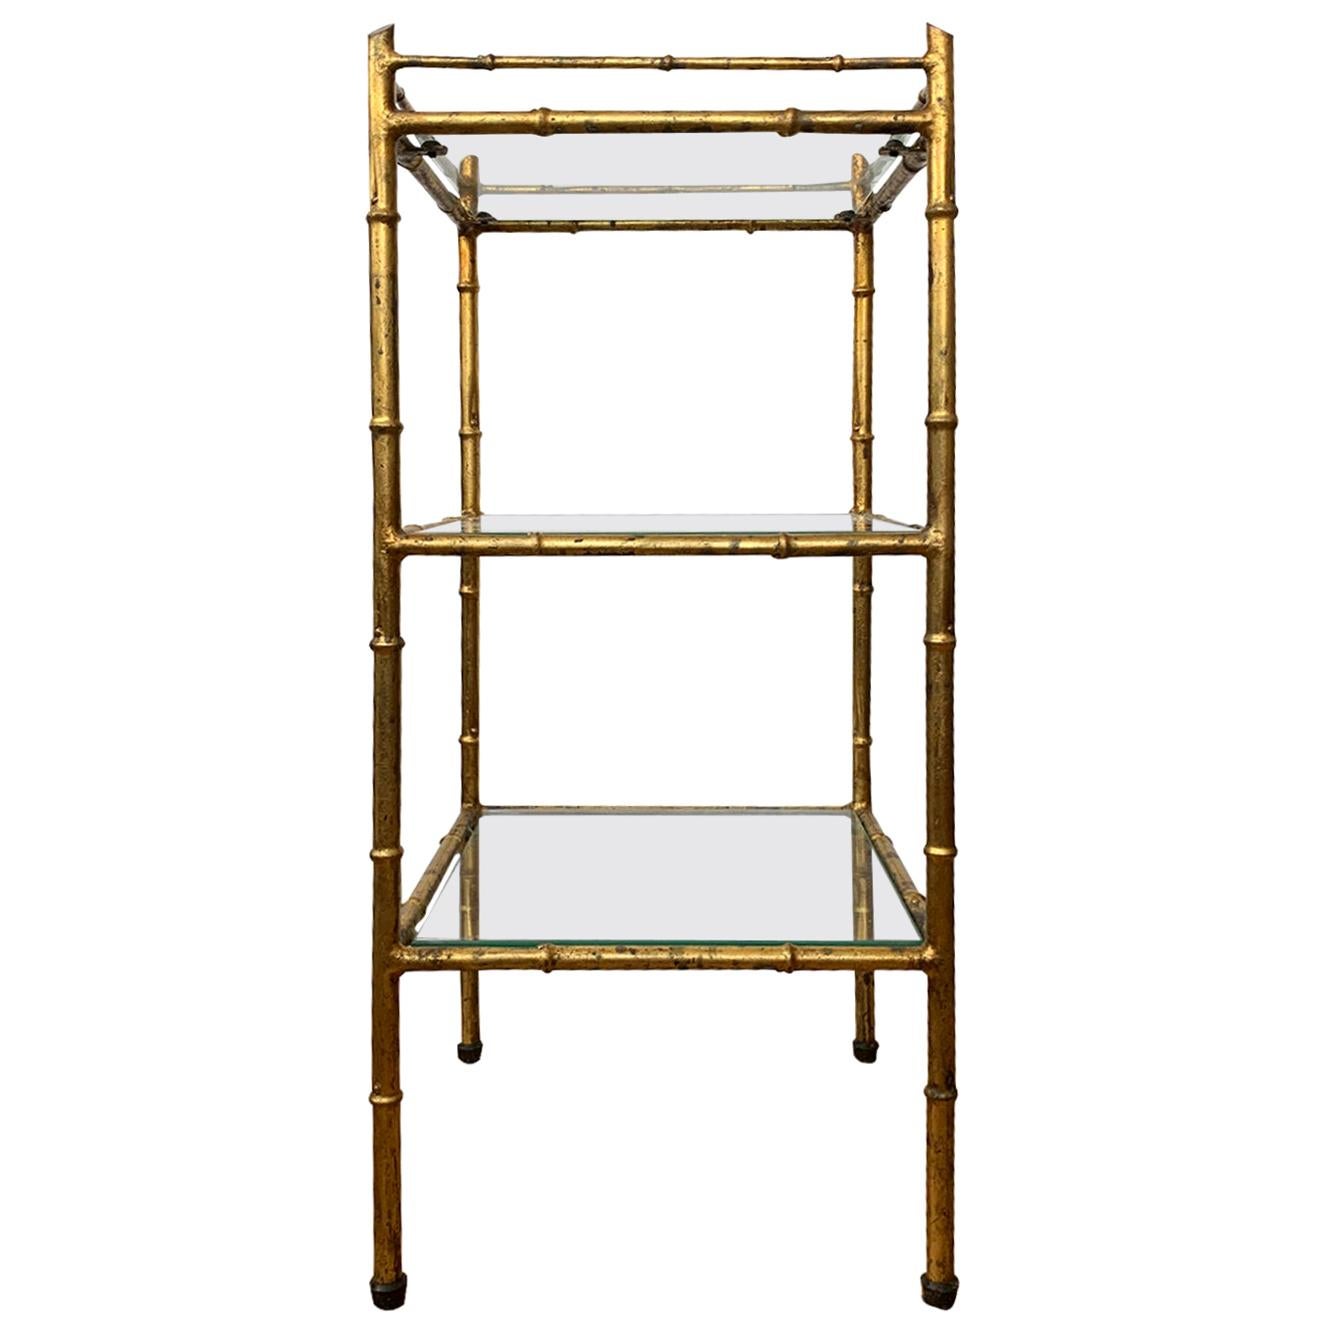 20th Century Faux Bamboo Gilt Metal Three-Tier Étagère with Glass Shelves